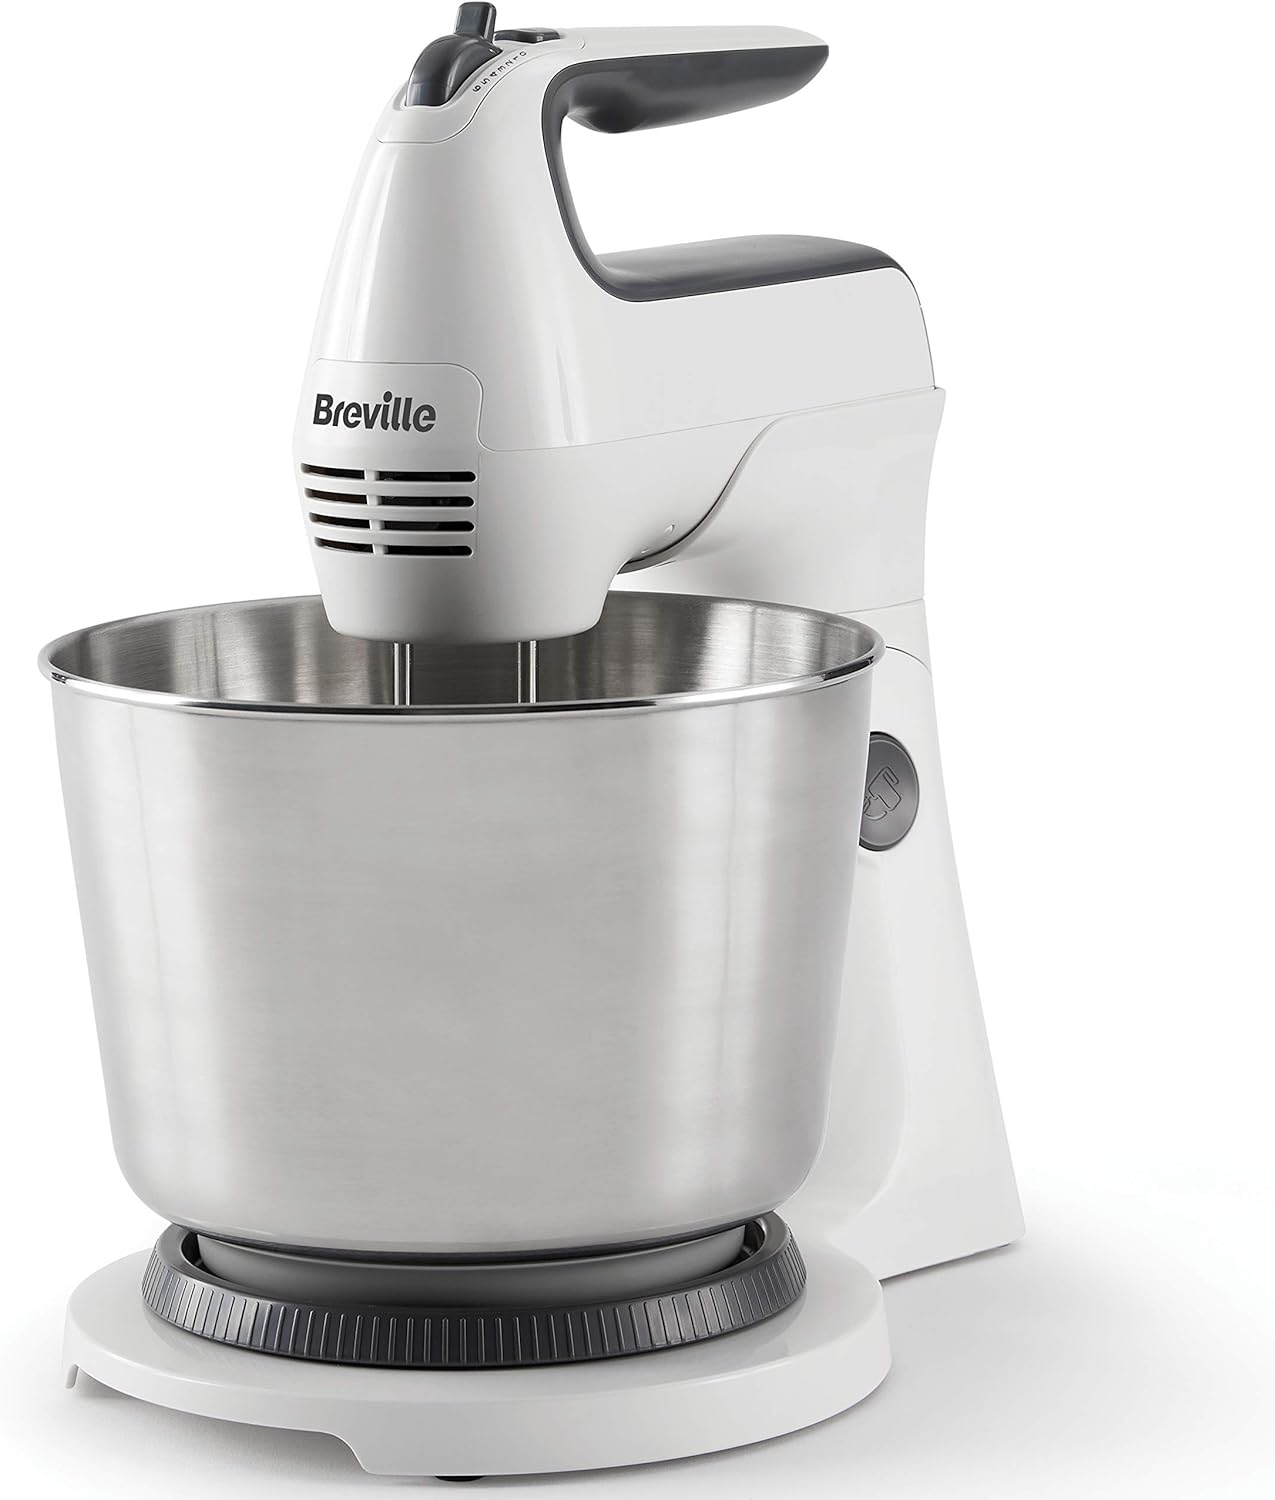 Breville Classic Combo Stand and Hand Mixer, Electric Hand Whisk and Stand  Food Mixer, 3.7 Litre Stainless Steel Bowl, Swivel Control…